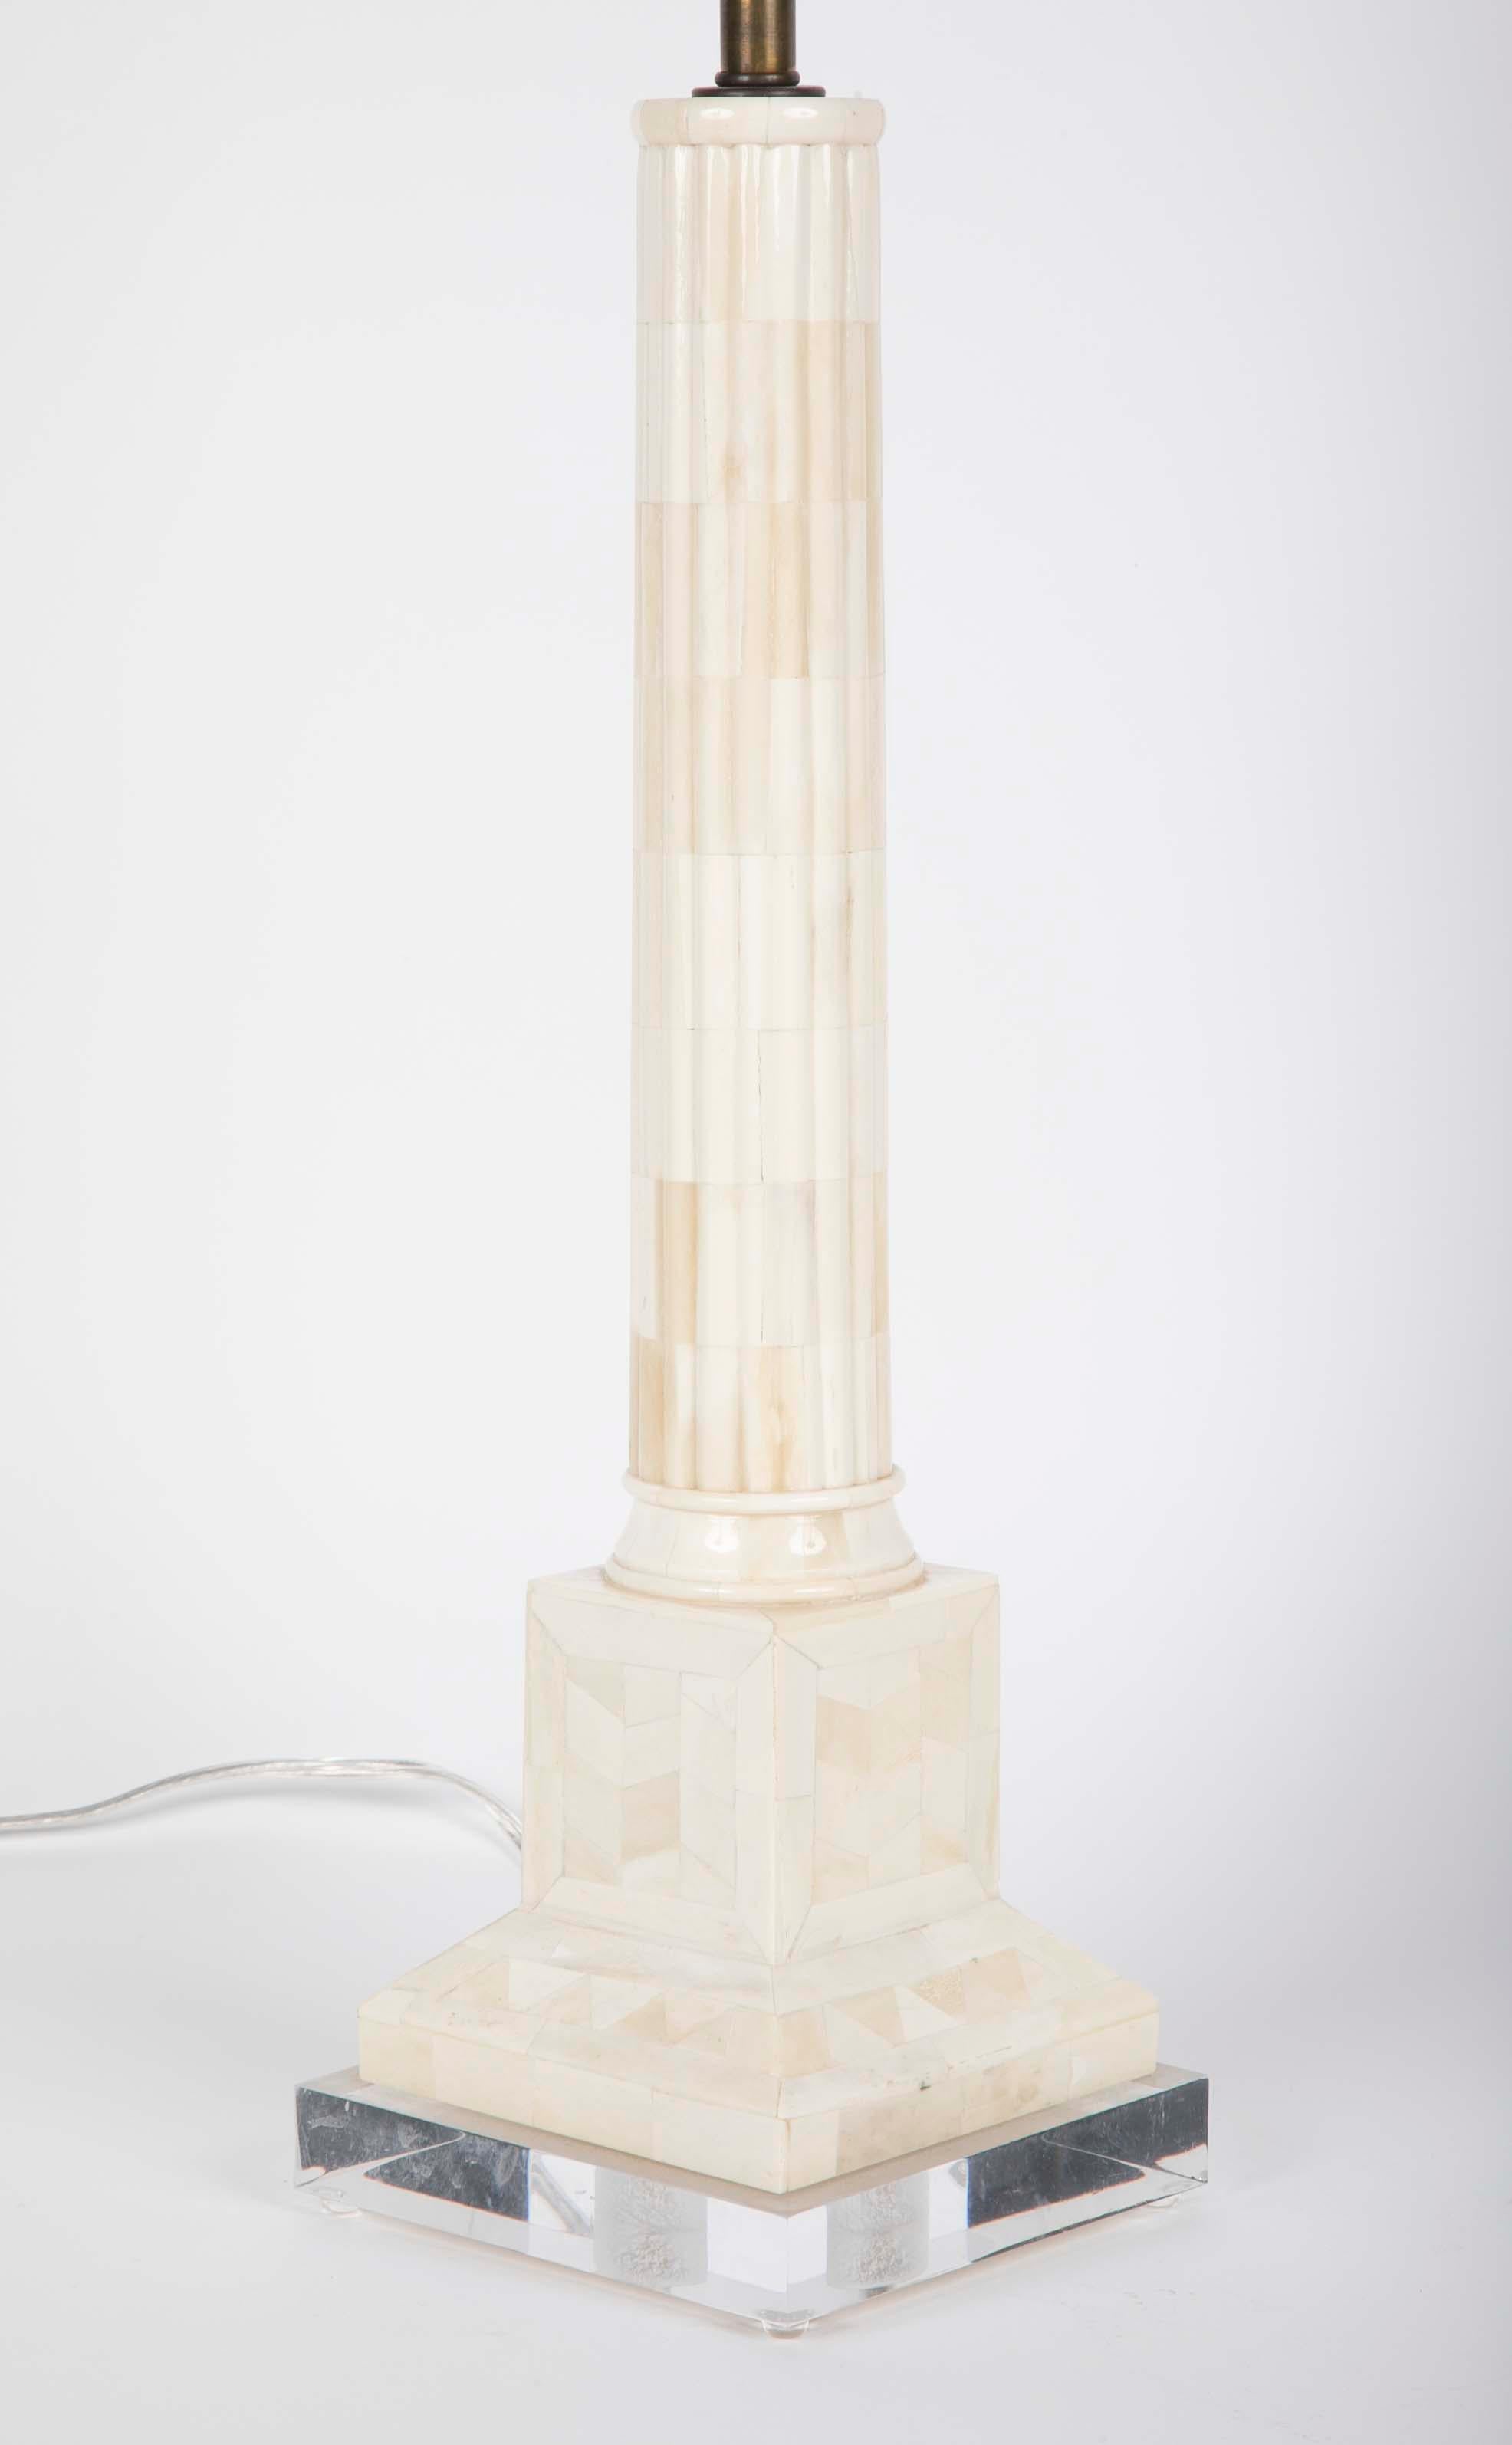 An elegant pair of column-form tessellated and polished bone table lamps. Modeled after Roman marble columns, these lamps are the perfect modern expression of the neoclassical. The round shafts resting on square plinths supported by Lucite bases.